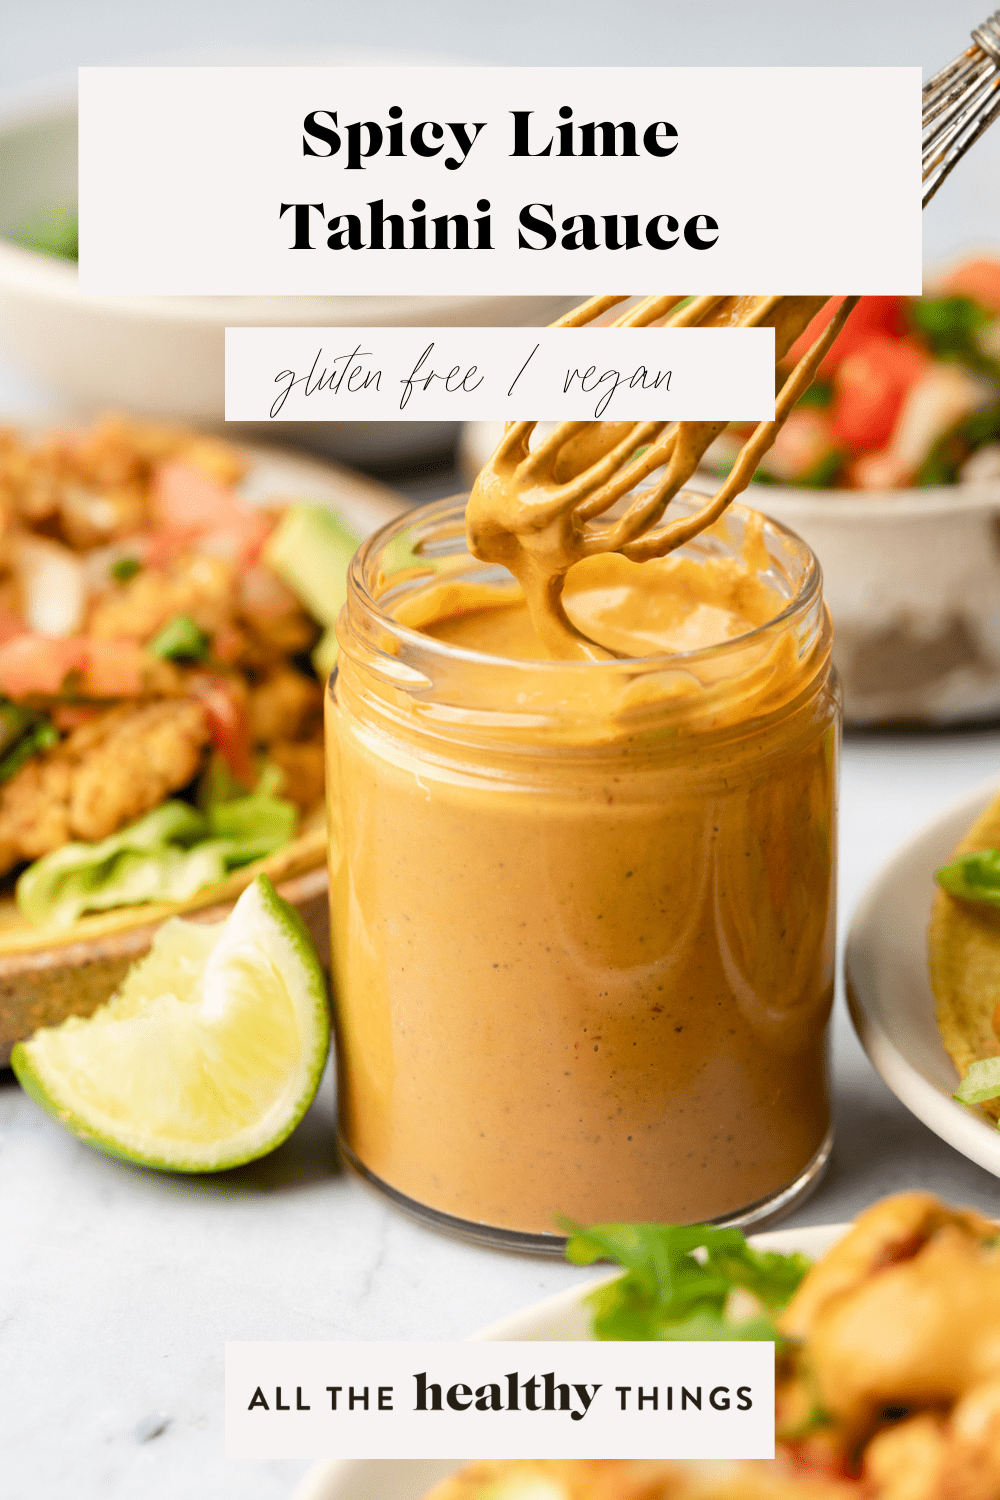 Spicy Lime Tahini Sauce - All the Healthy Things